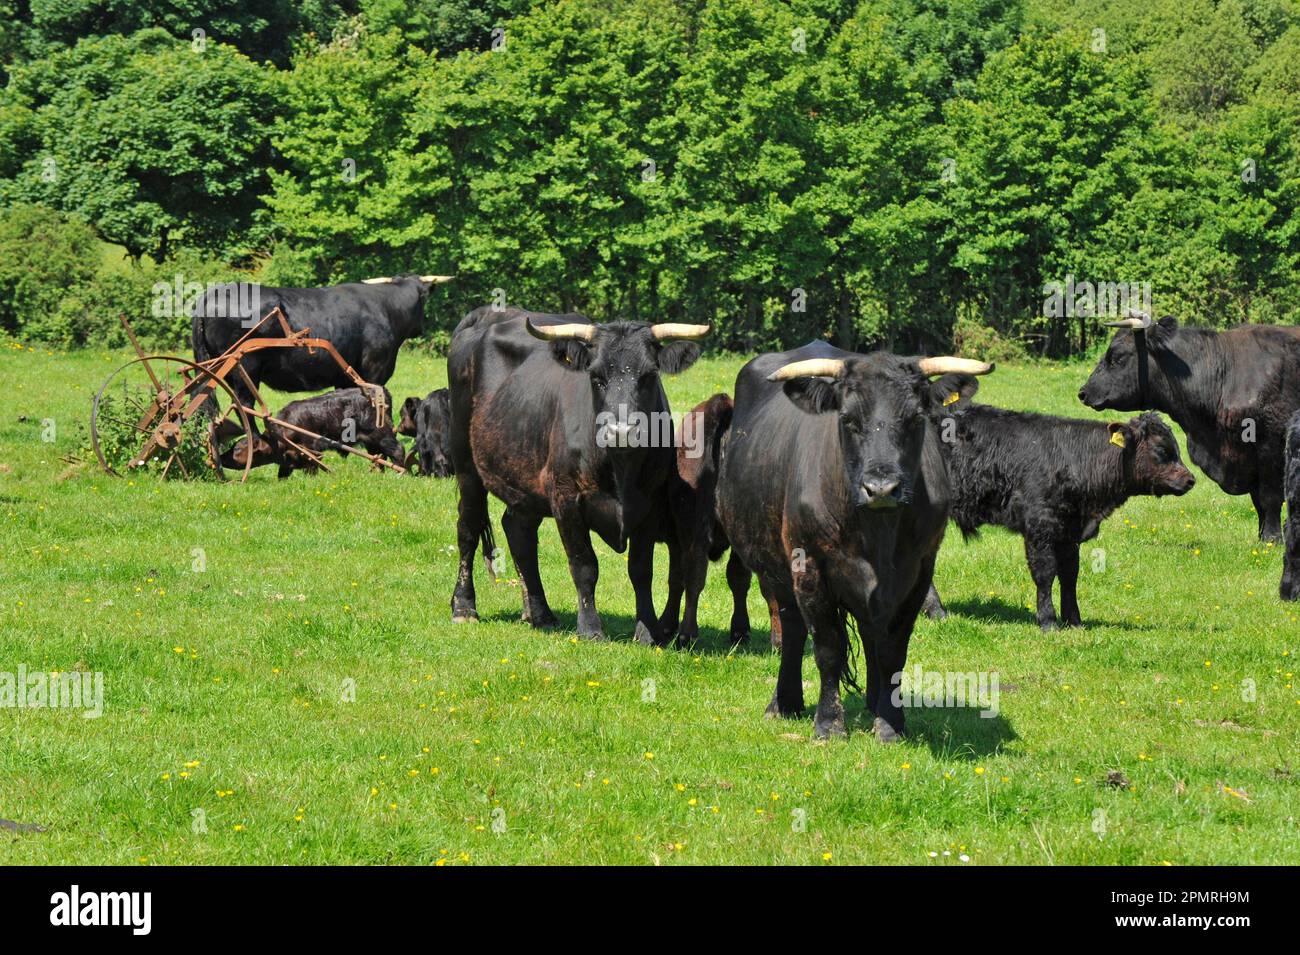 Domestic cattle, Welsh Black cows and calves, standing in pasture next to old farm equipment, near Helston, Cornwall, England, United Kingdom Stock Photo